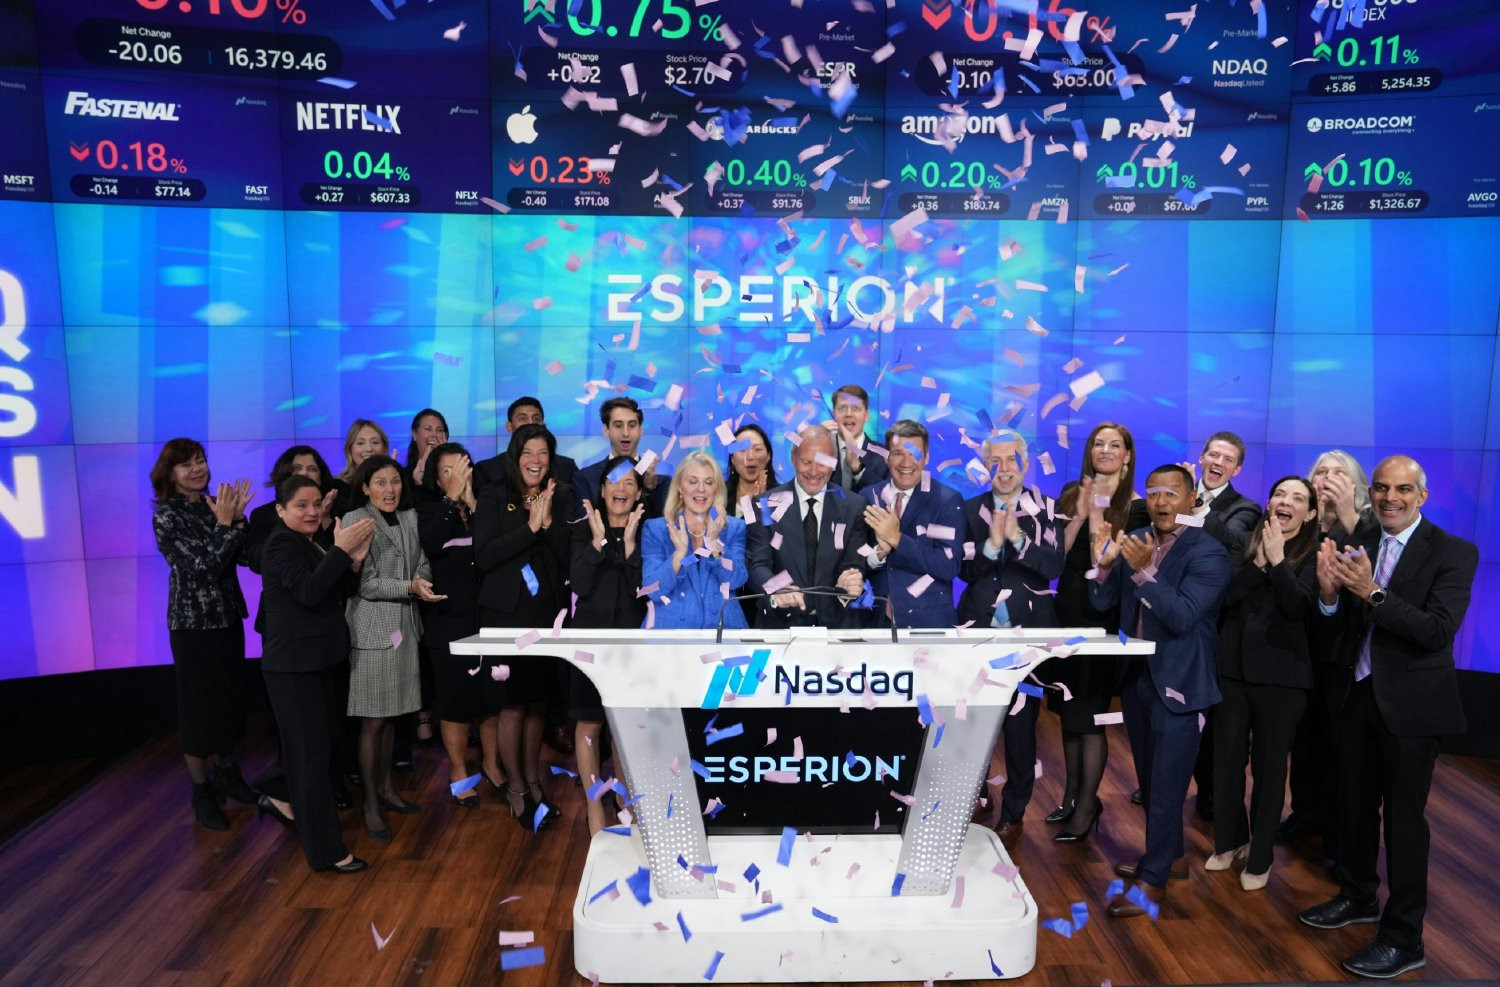 Esperion team members ring the opening Nasdaq bell to celebrate the FDA label expansion of its products.